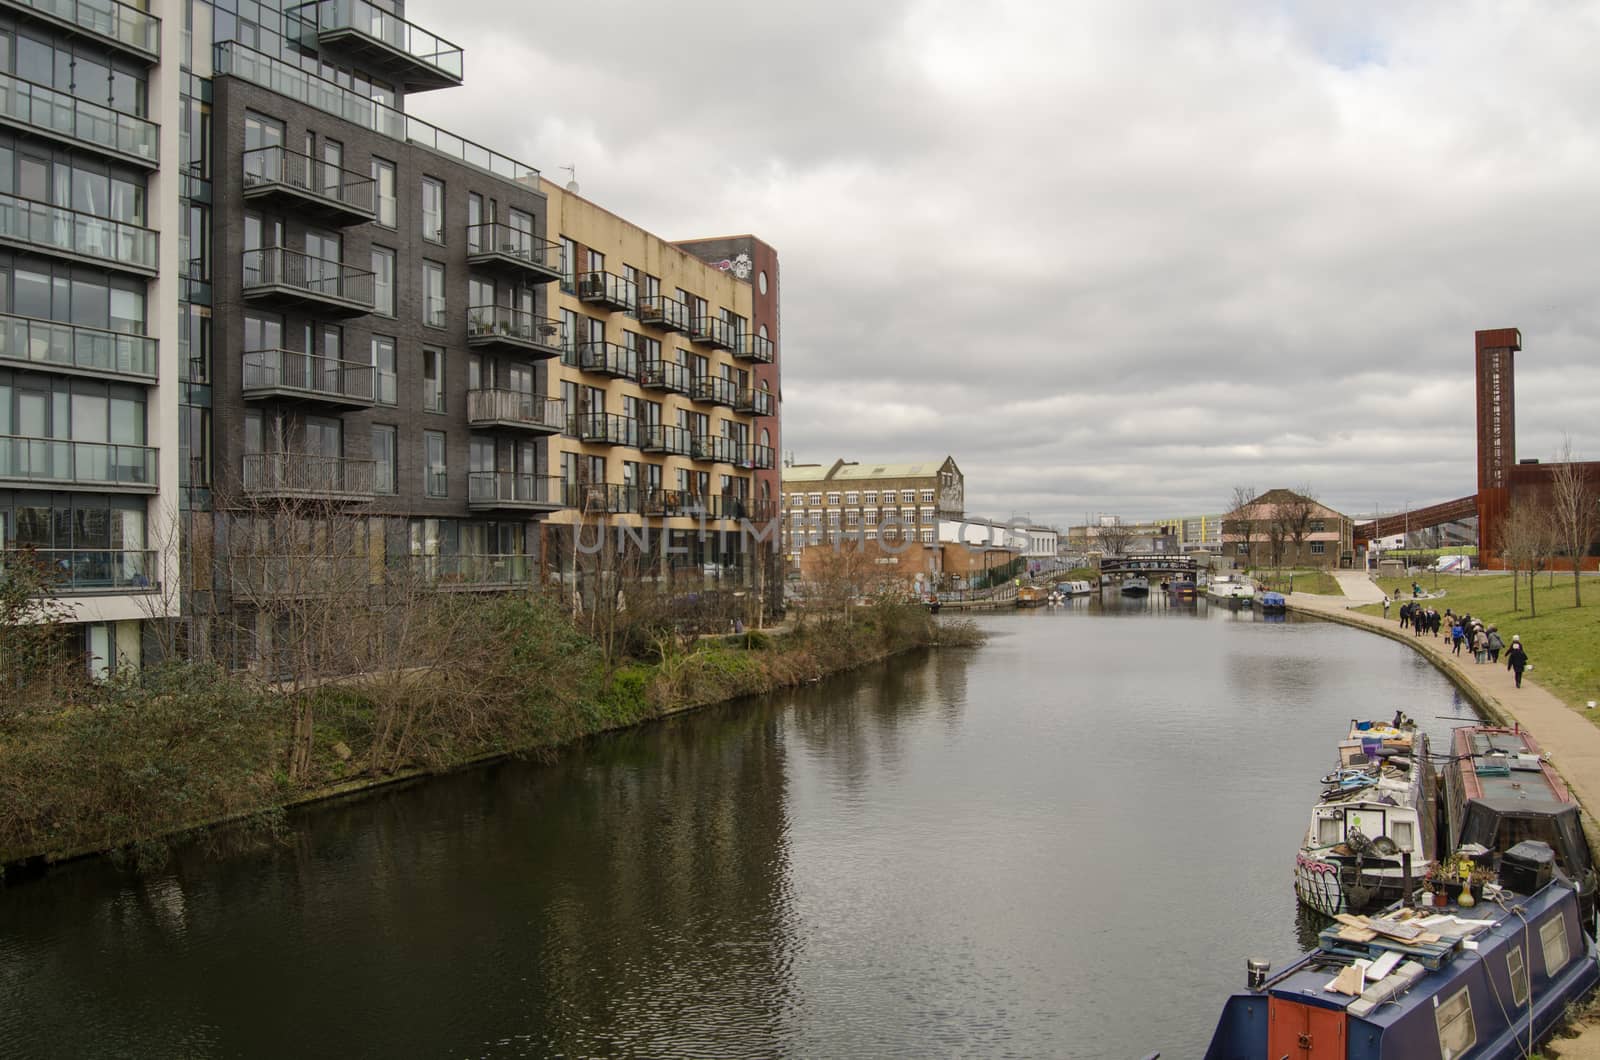 Walkers enjoying the views on a cloudy March day along the Lee Navigation, a canalised part of the River Lea running between Hackney Wick and the Queen Elizabeth Park in Newham, East London.  The Olympic Park Energy Centre is on the right hand side.